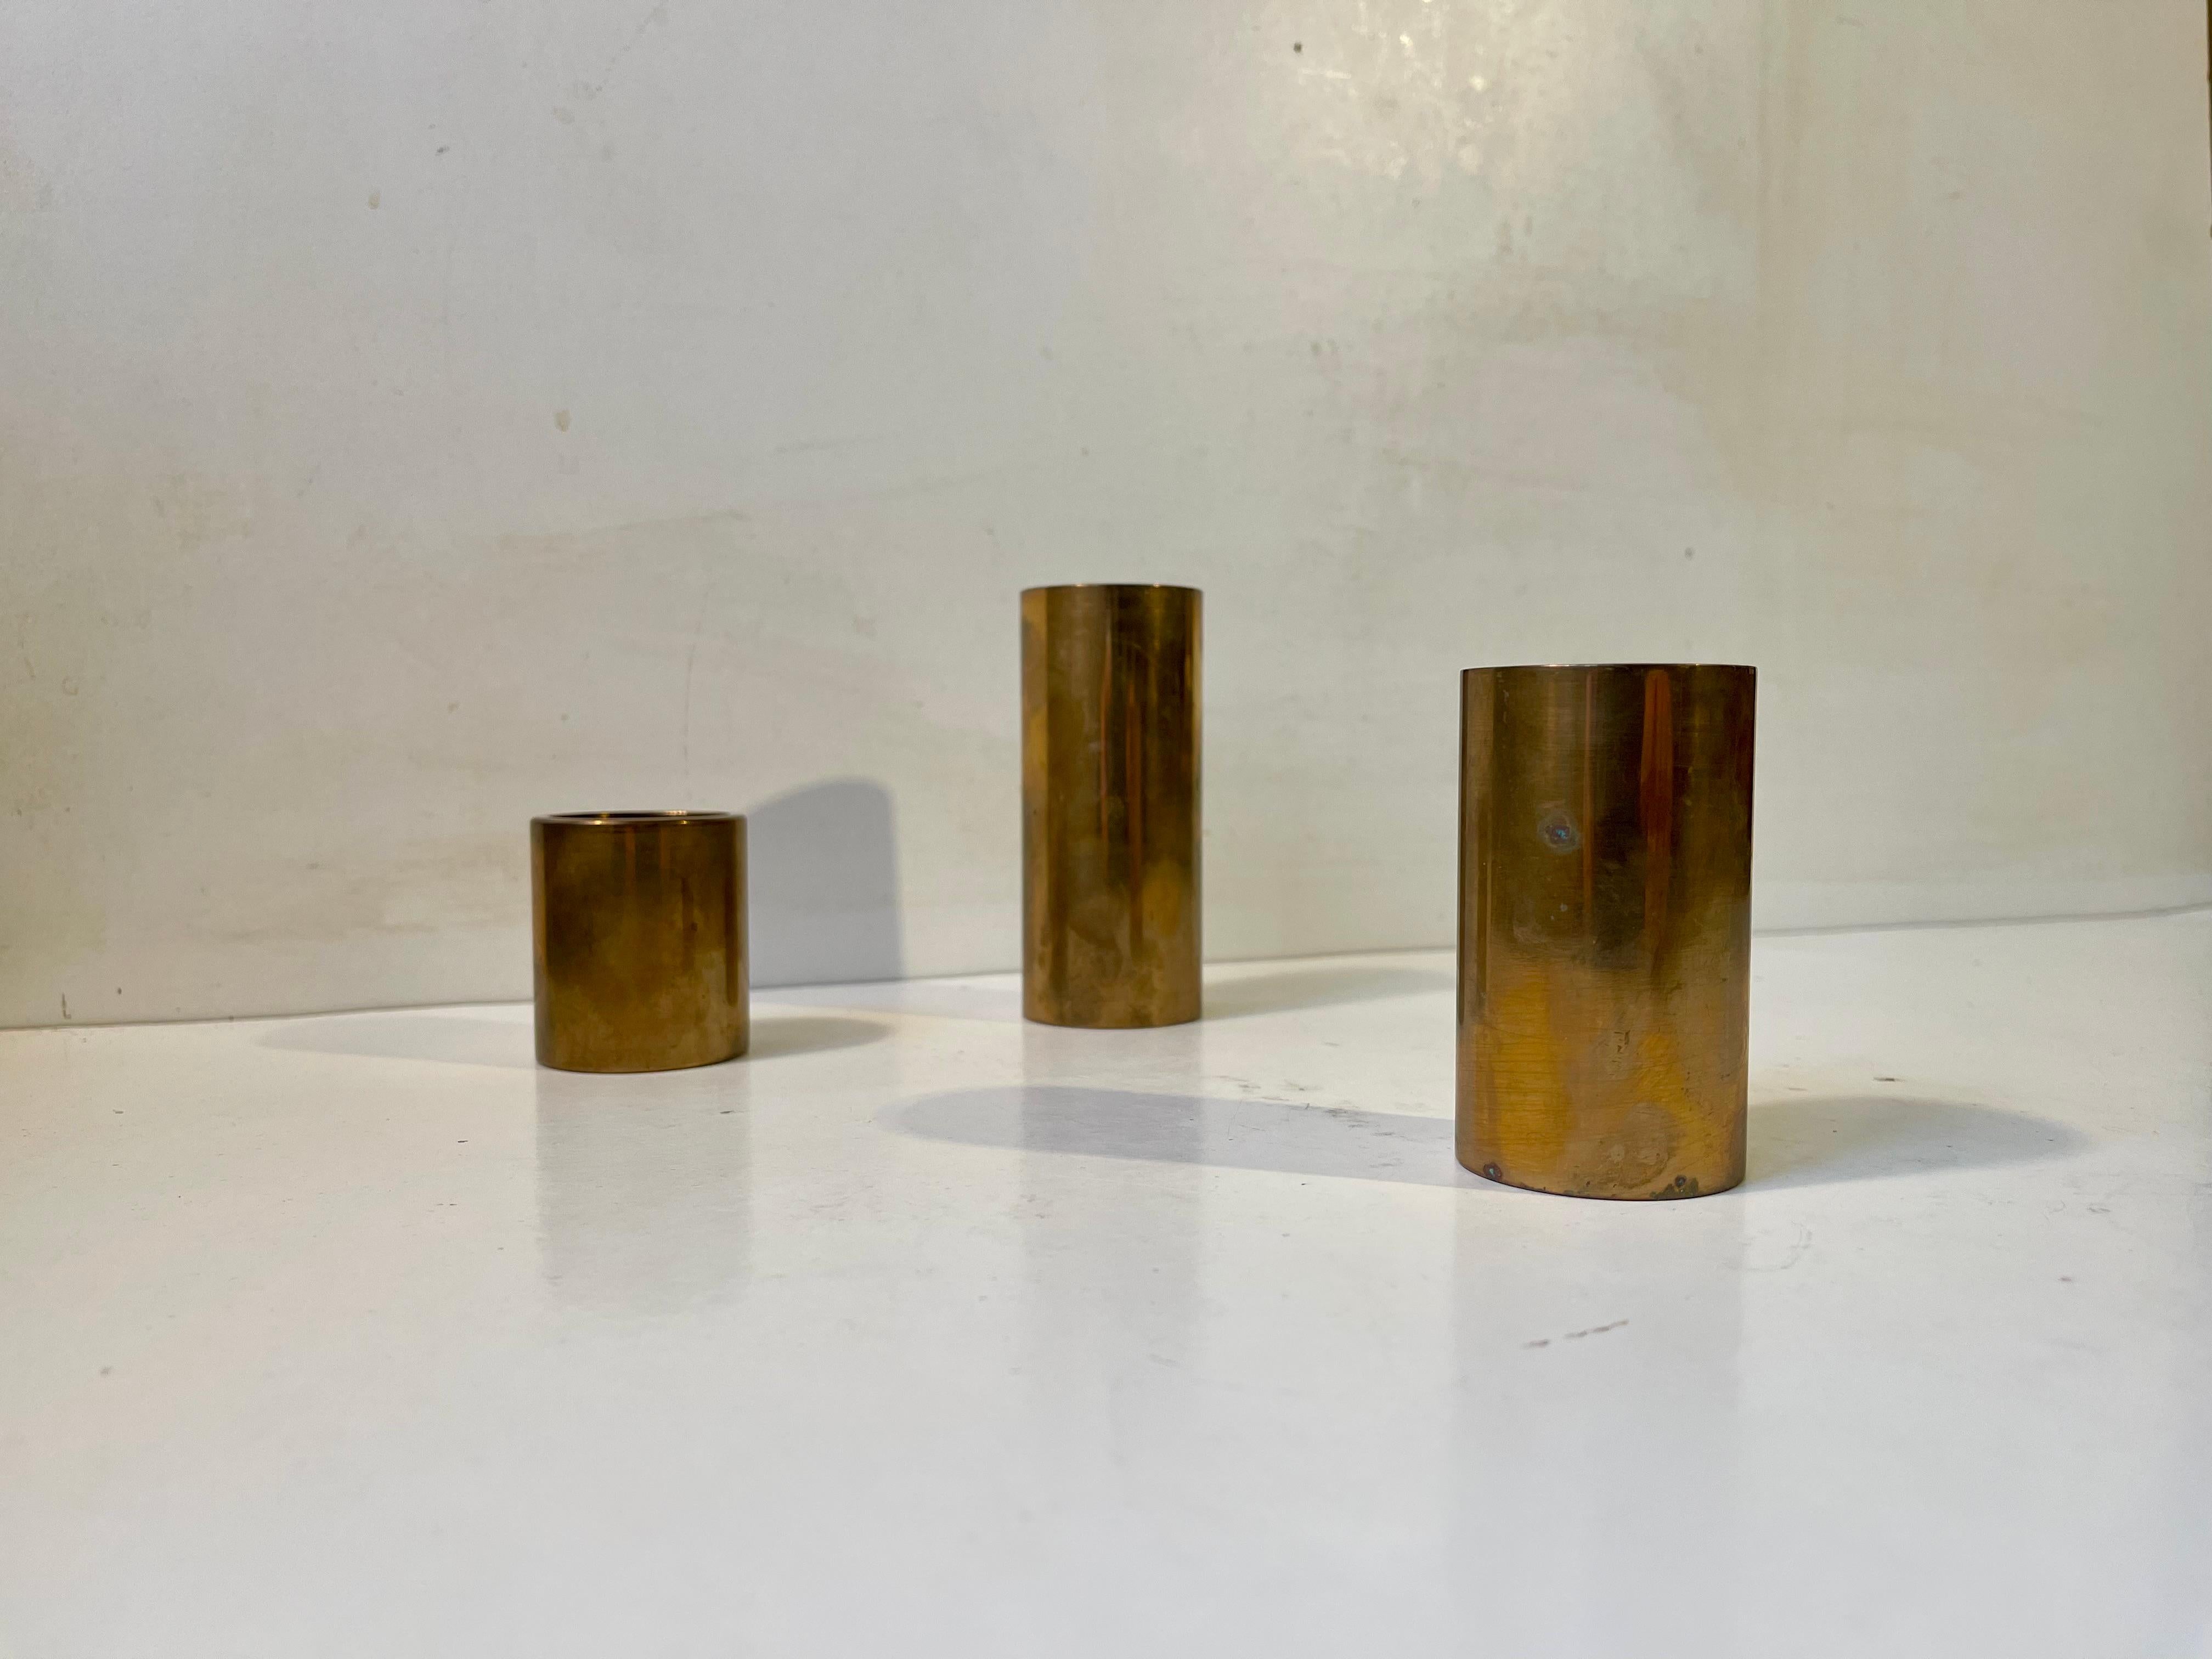 A set of 3 danish modern chimney shaped candleholders. Made from heavy stock patinated bronze. Great Nautical/maritime/industrial vibe to them. They can be installed with either tea light candles or church/bloc candles. Made in Denmark during the